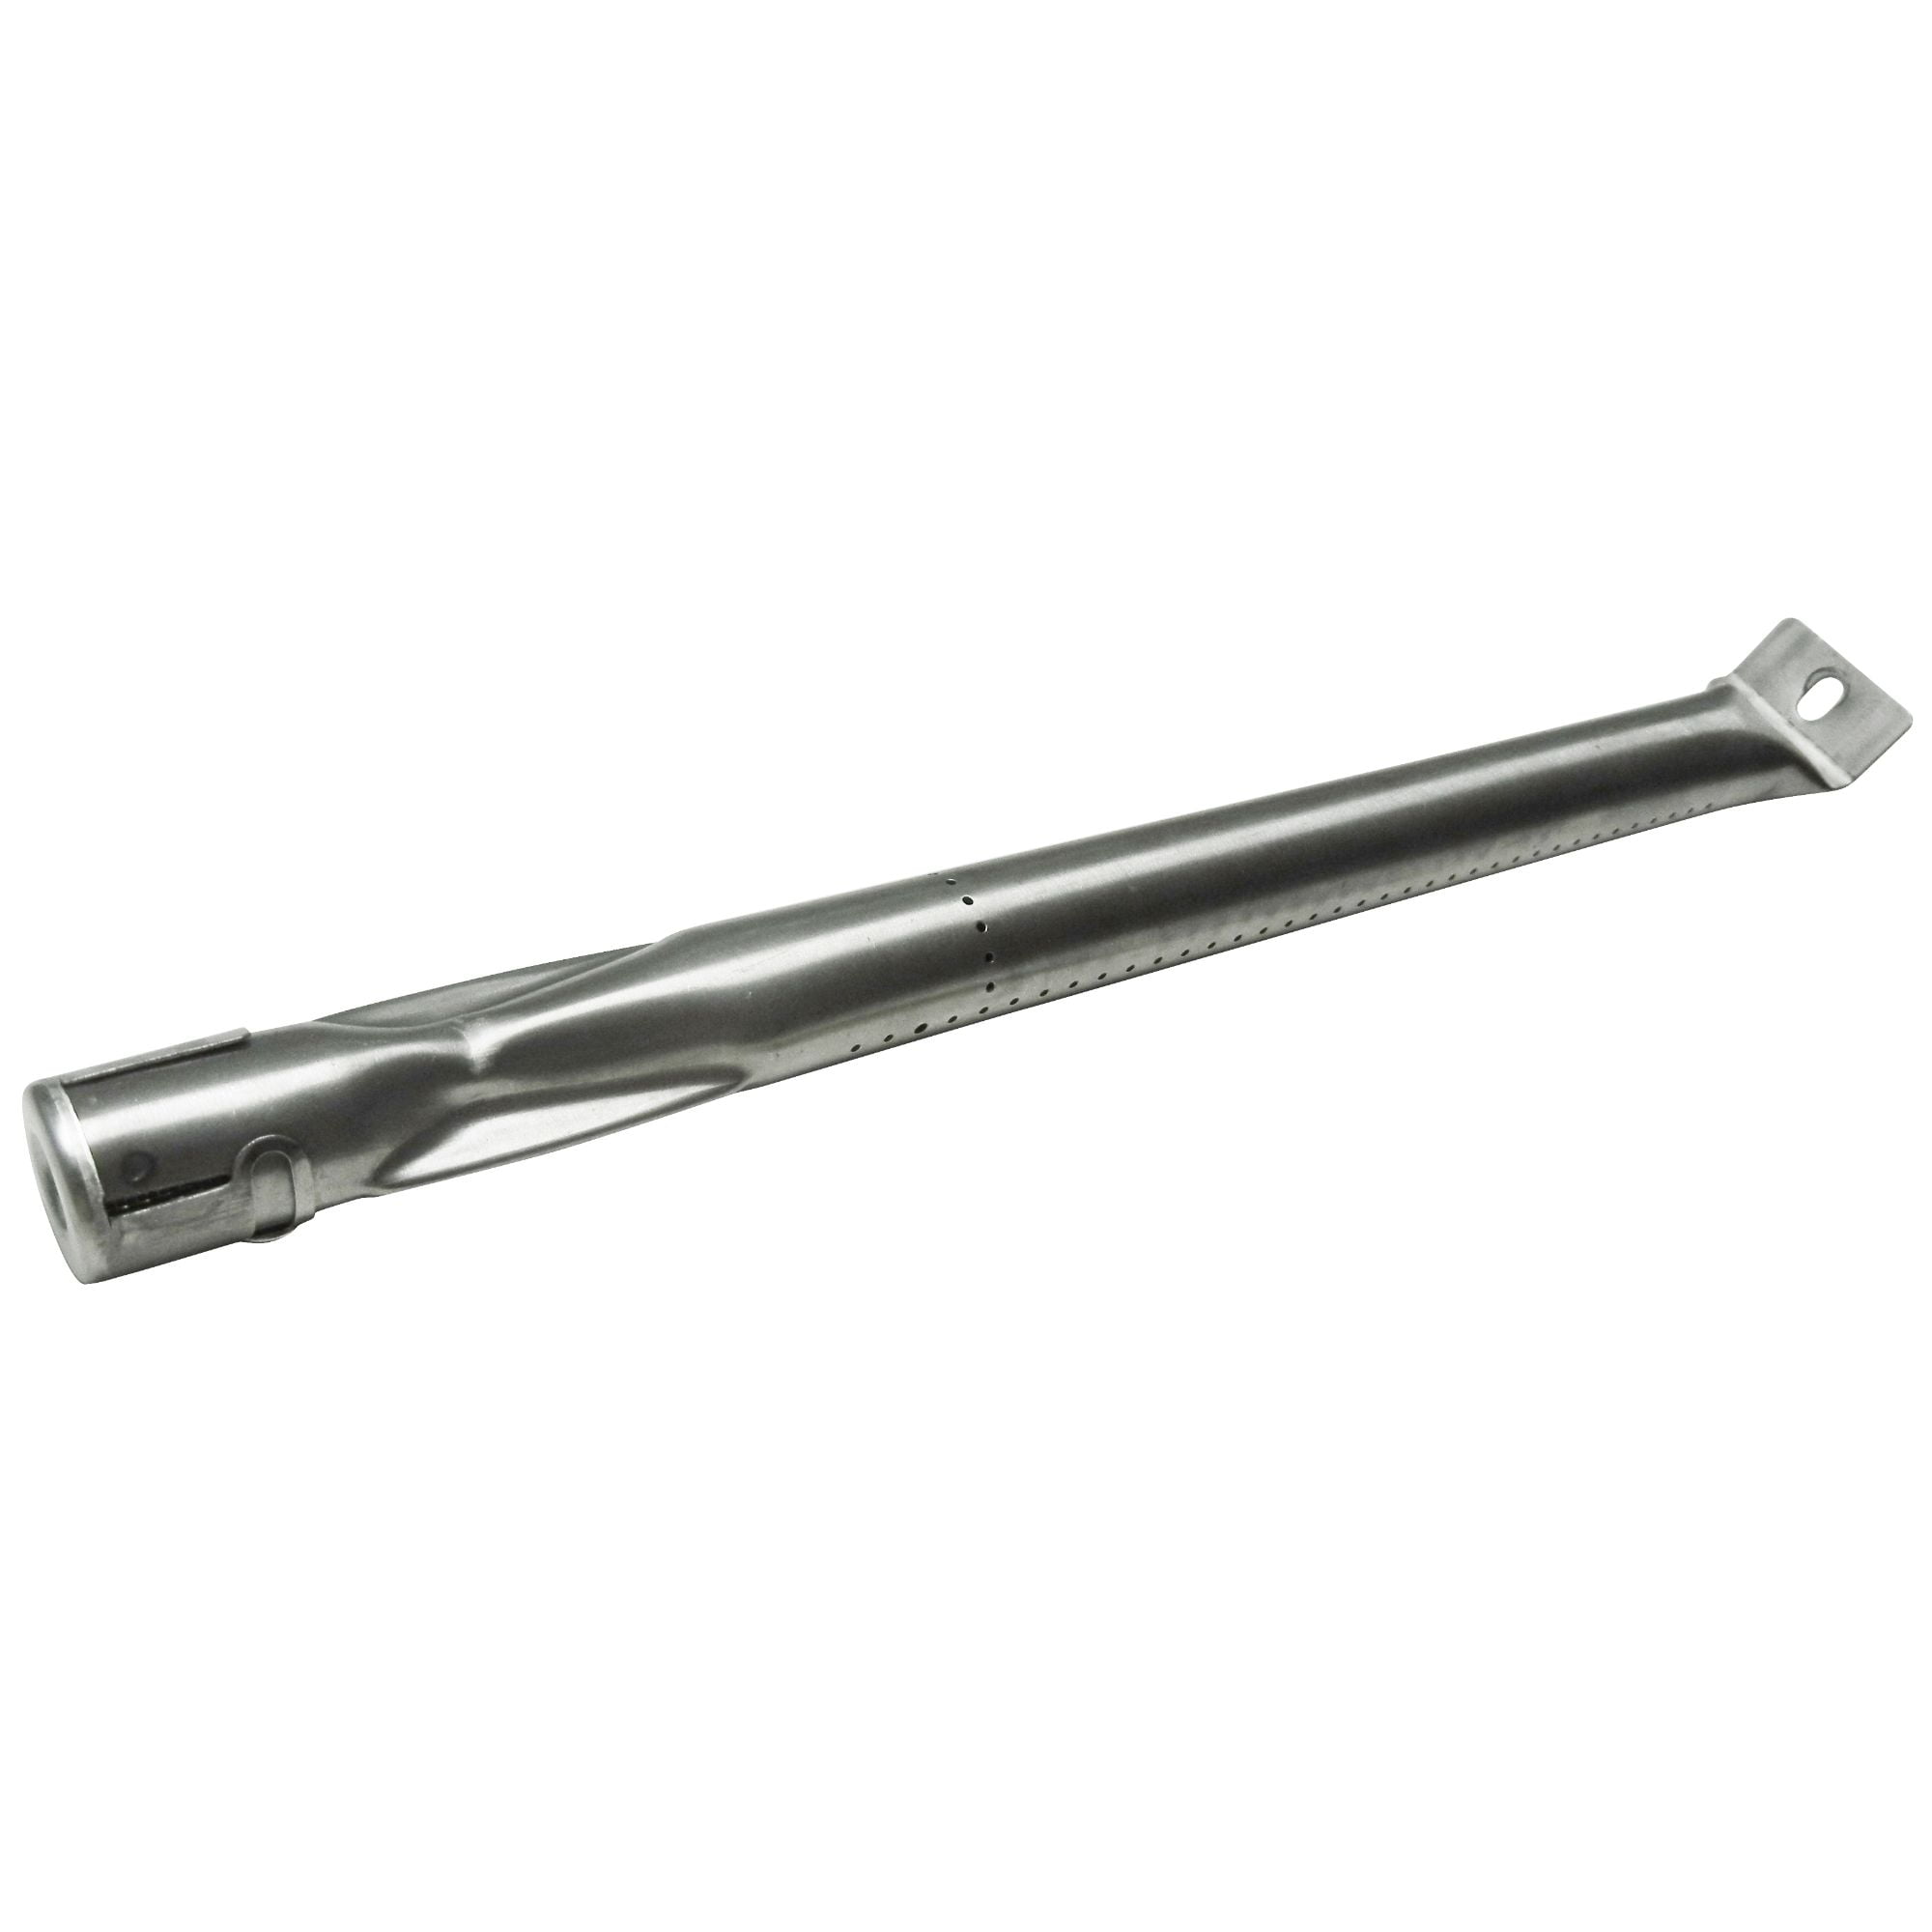 Stainless Steel Burner for Tera Gear Brand Gas Grills